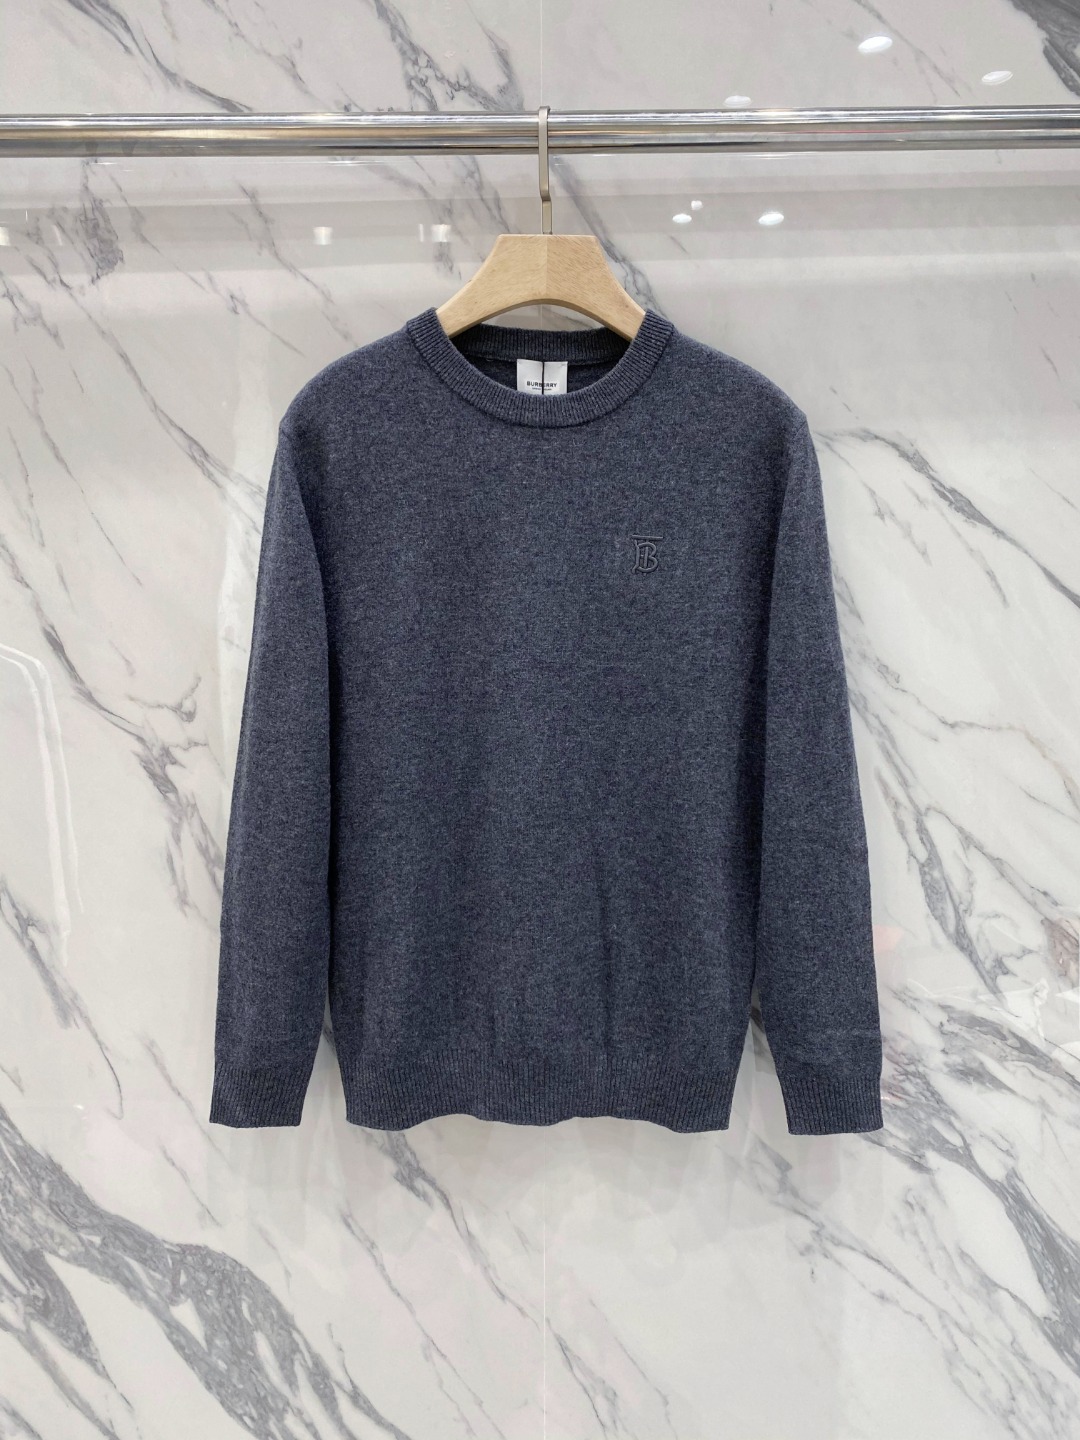 Where Can I Find
 Burberry Clothing Sweatshirts Cashmere Spandex Wool Fall/Winter Collection